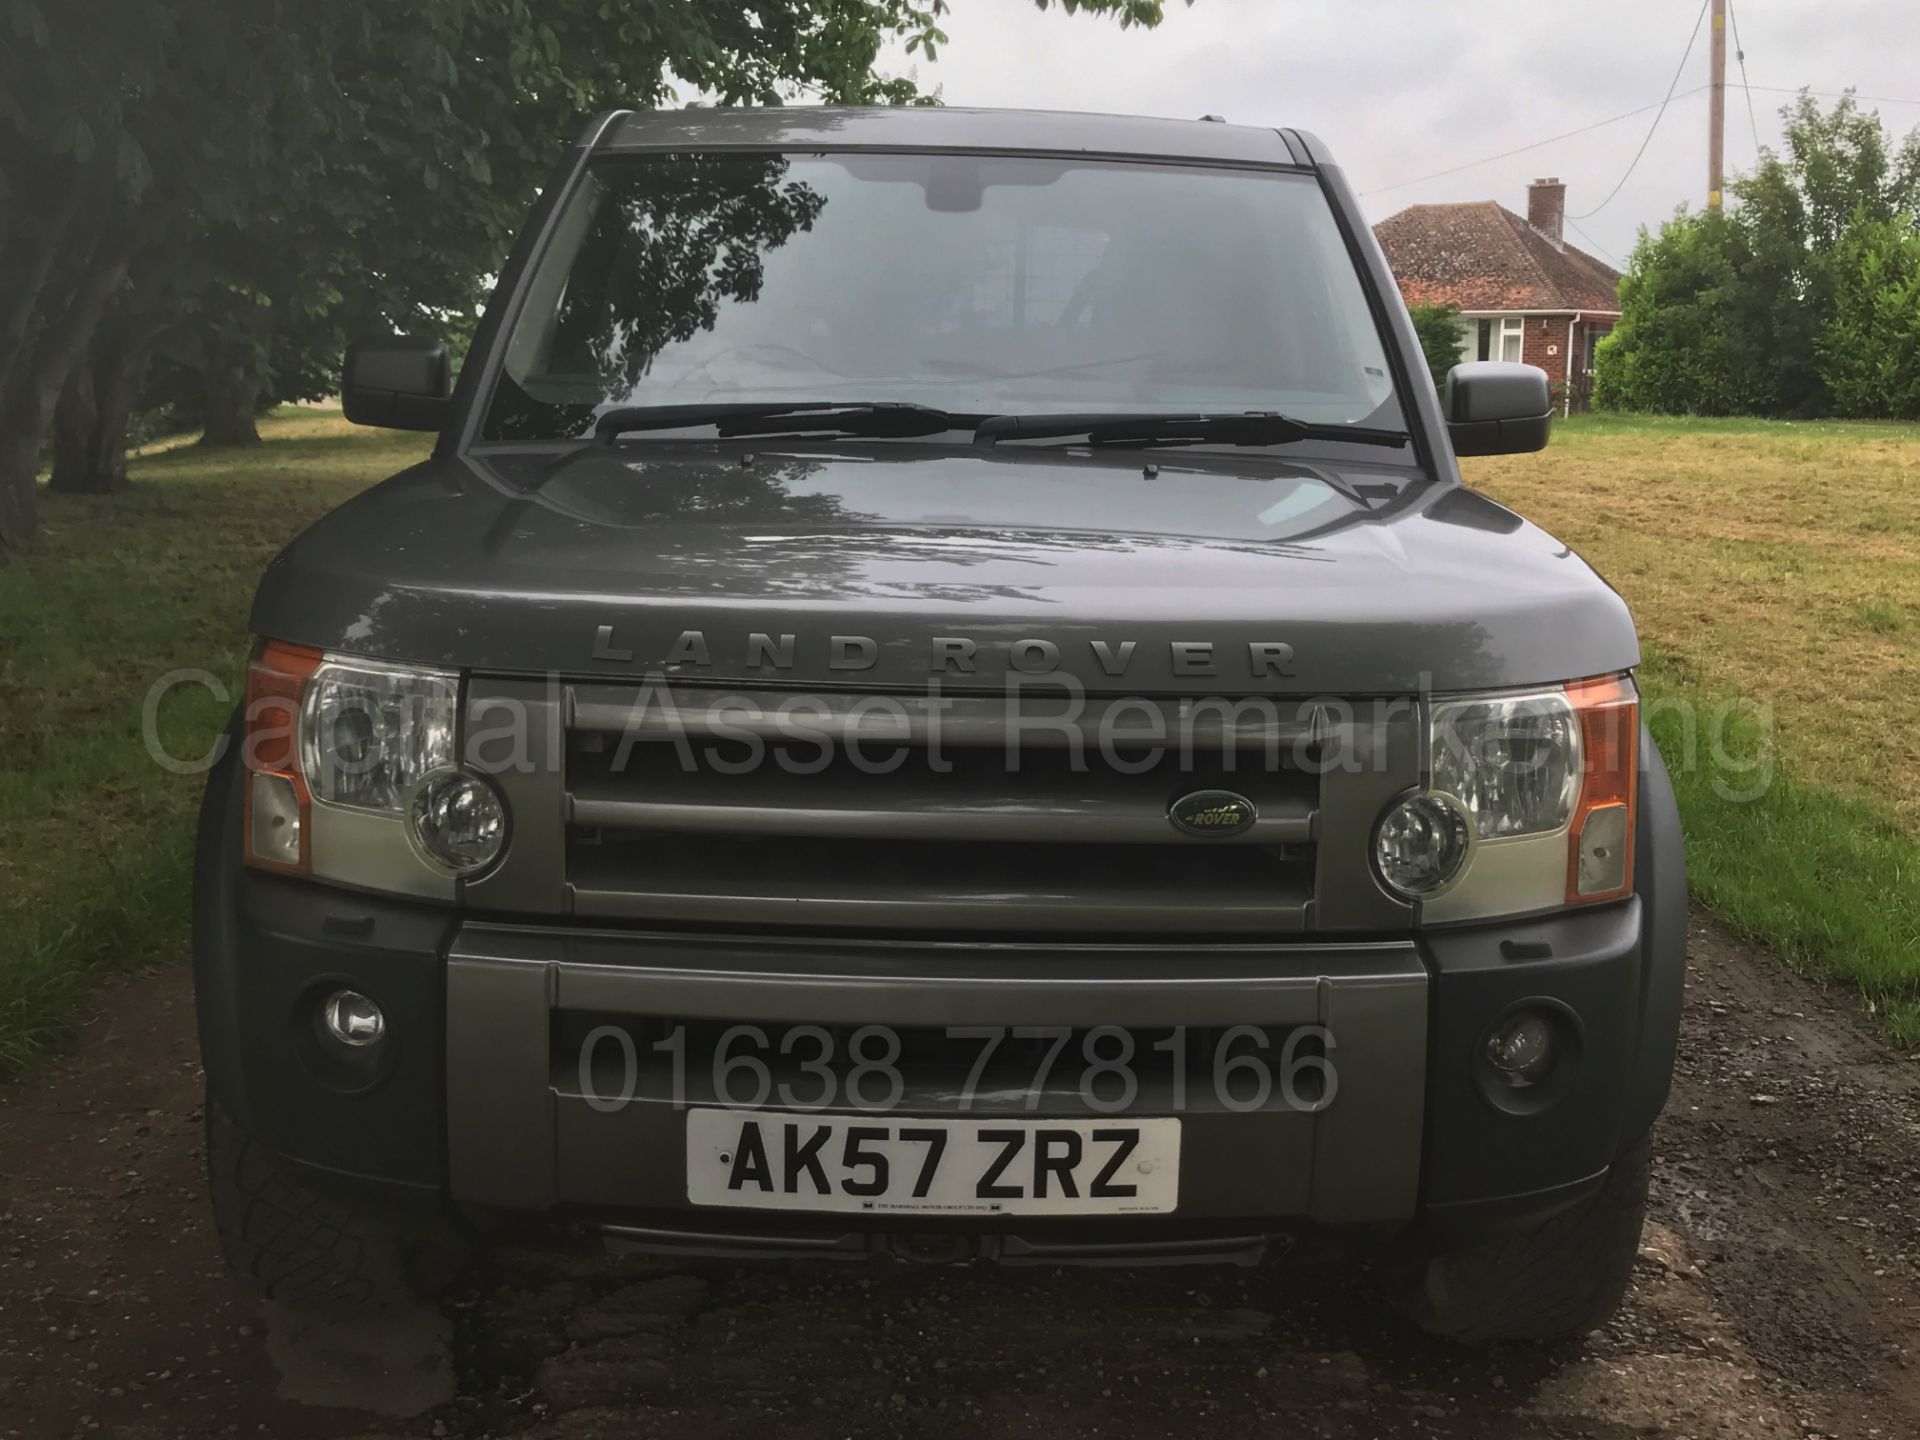 (On Sale) LAND ROVER DISCOVERY 3 'XS EDITION' **COMMERCIAL VAN**(2008 MODEL) 'TDV6-190 BHP' (NO VAT) - Image 3 of 38